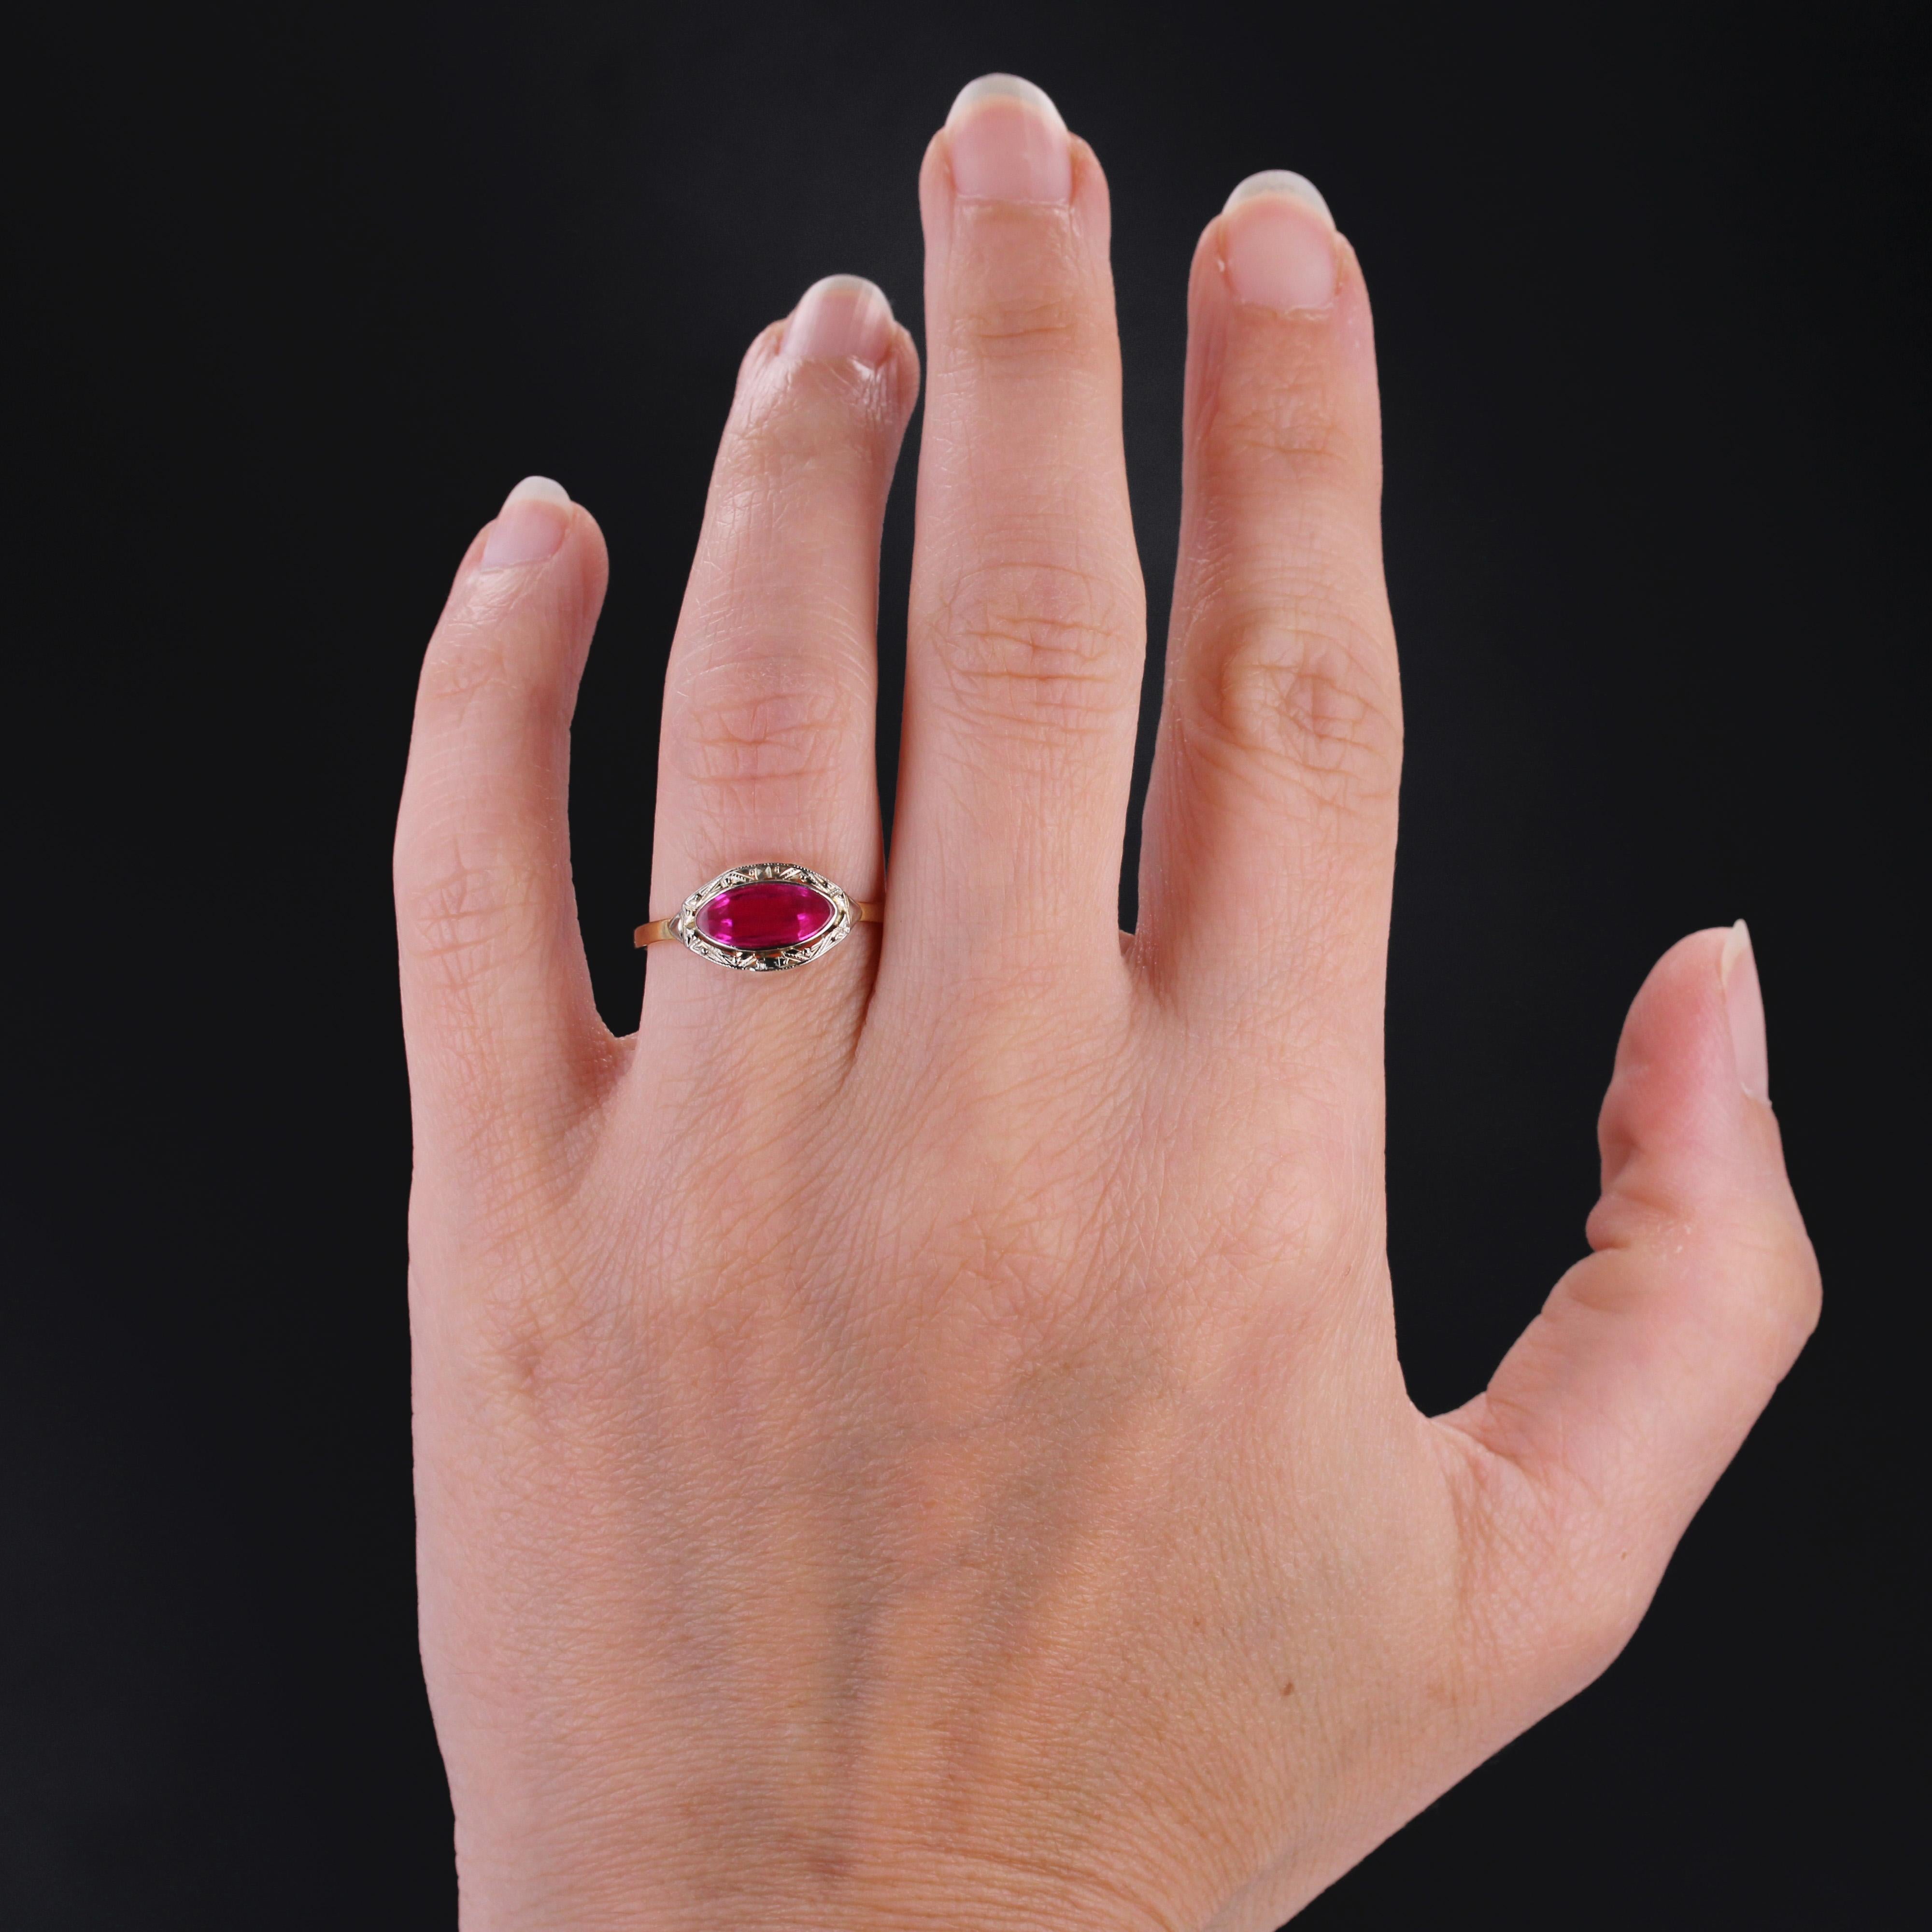 Ring in 18 karat yellow gold, eagle head hallmark.
Antique ring featuring a flat, navette-shaped synthetic ruby set in a chased setting.
Height : 7,5 mm approximately, width : 13,5 mm approximately, thickness : 2,6 mm, width of the ring at the base